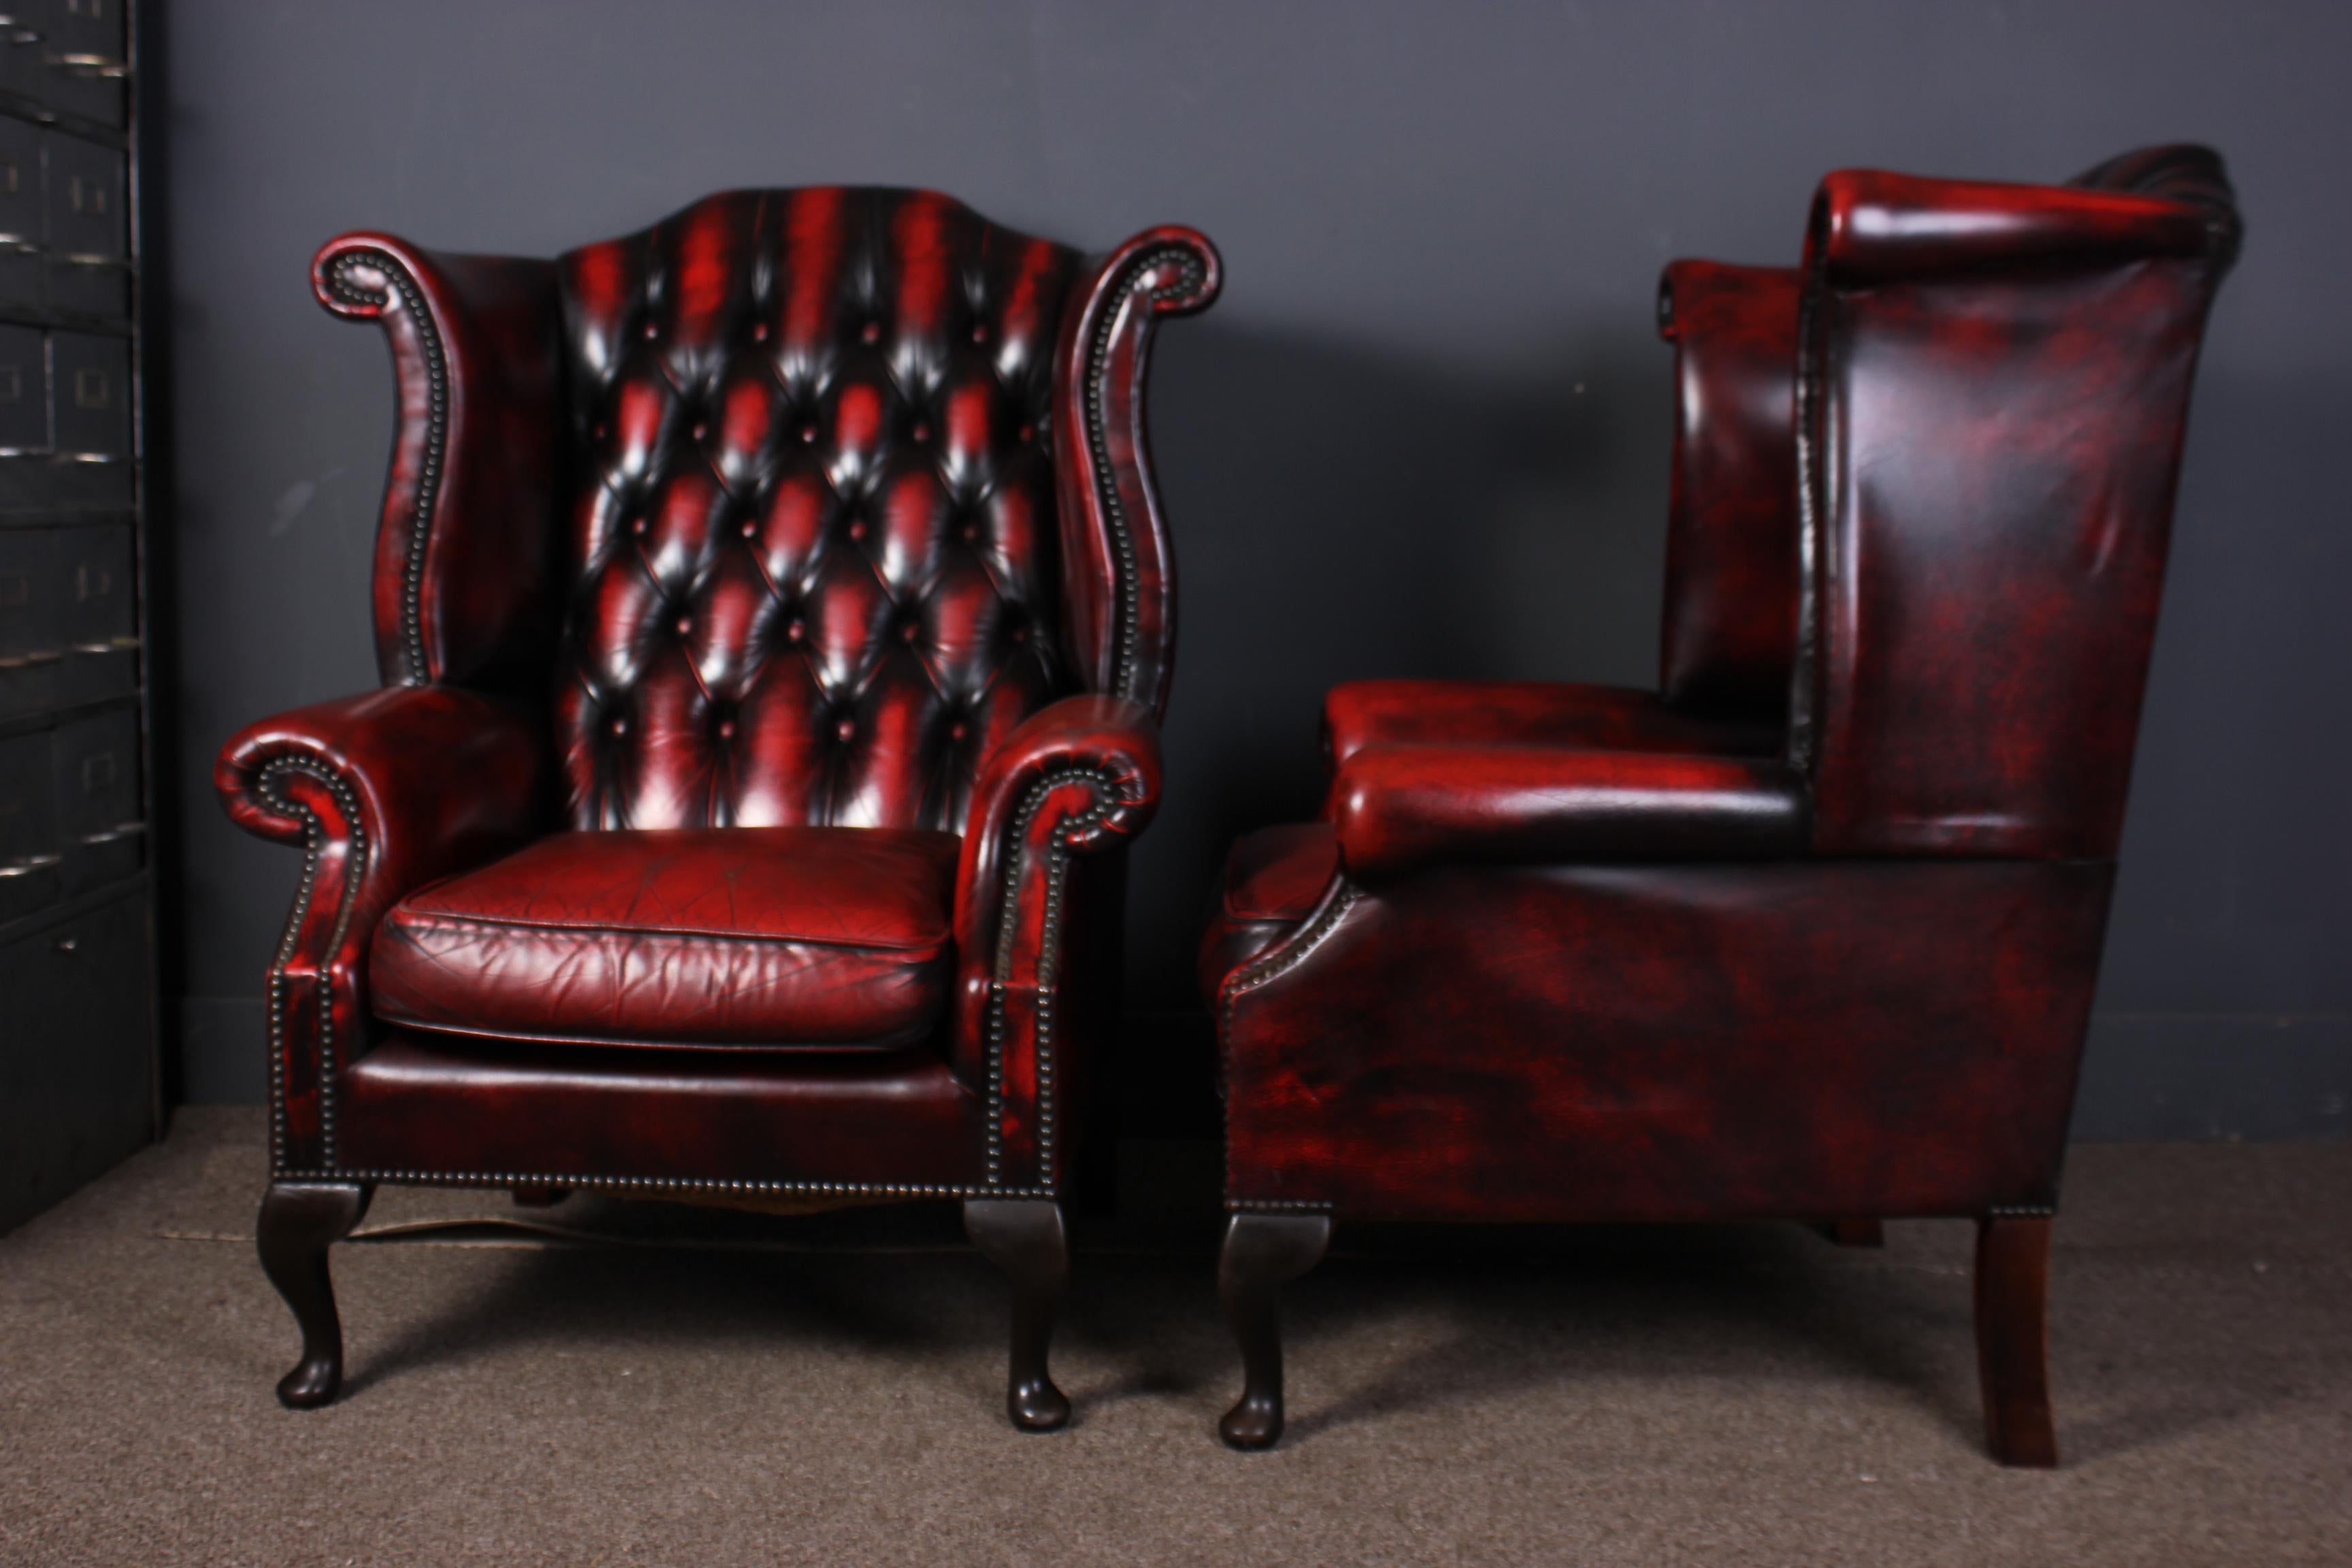 English Pair of Chesterfield Queen Anne Wing Back Chairs